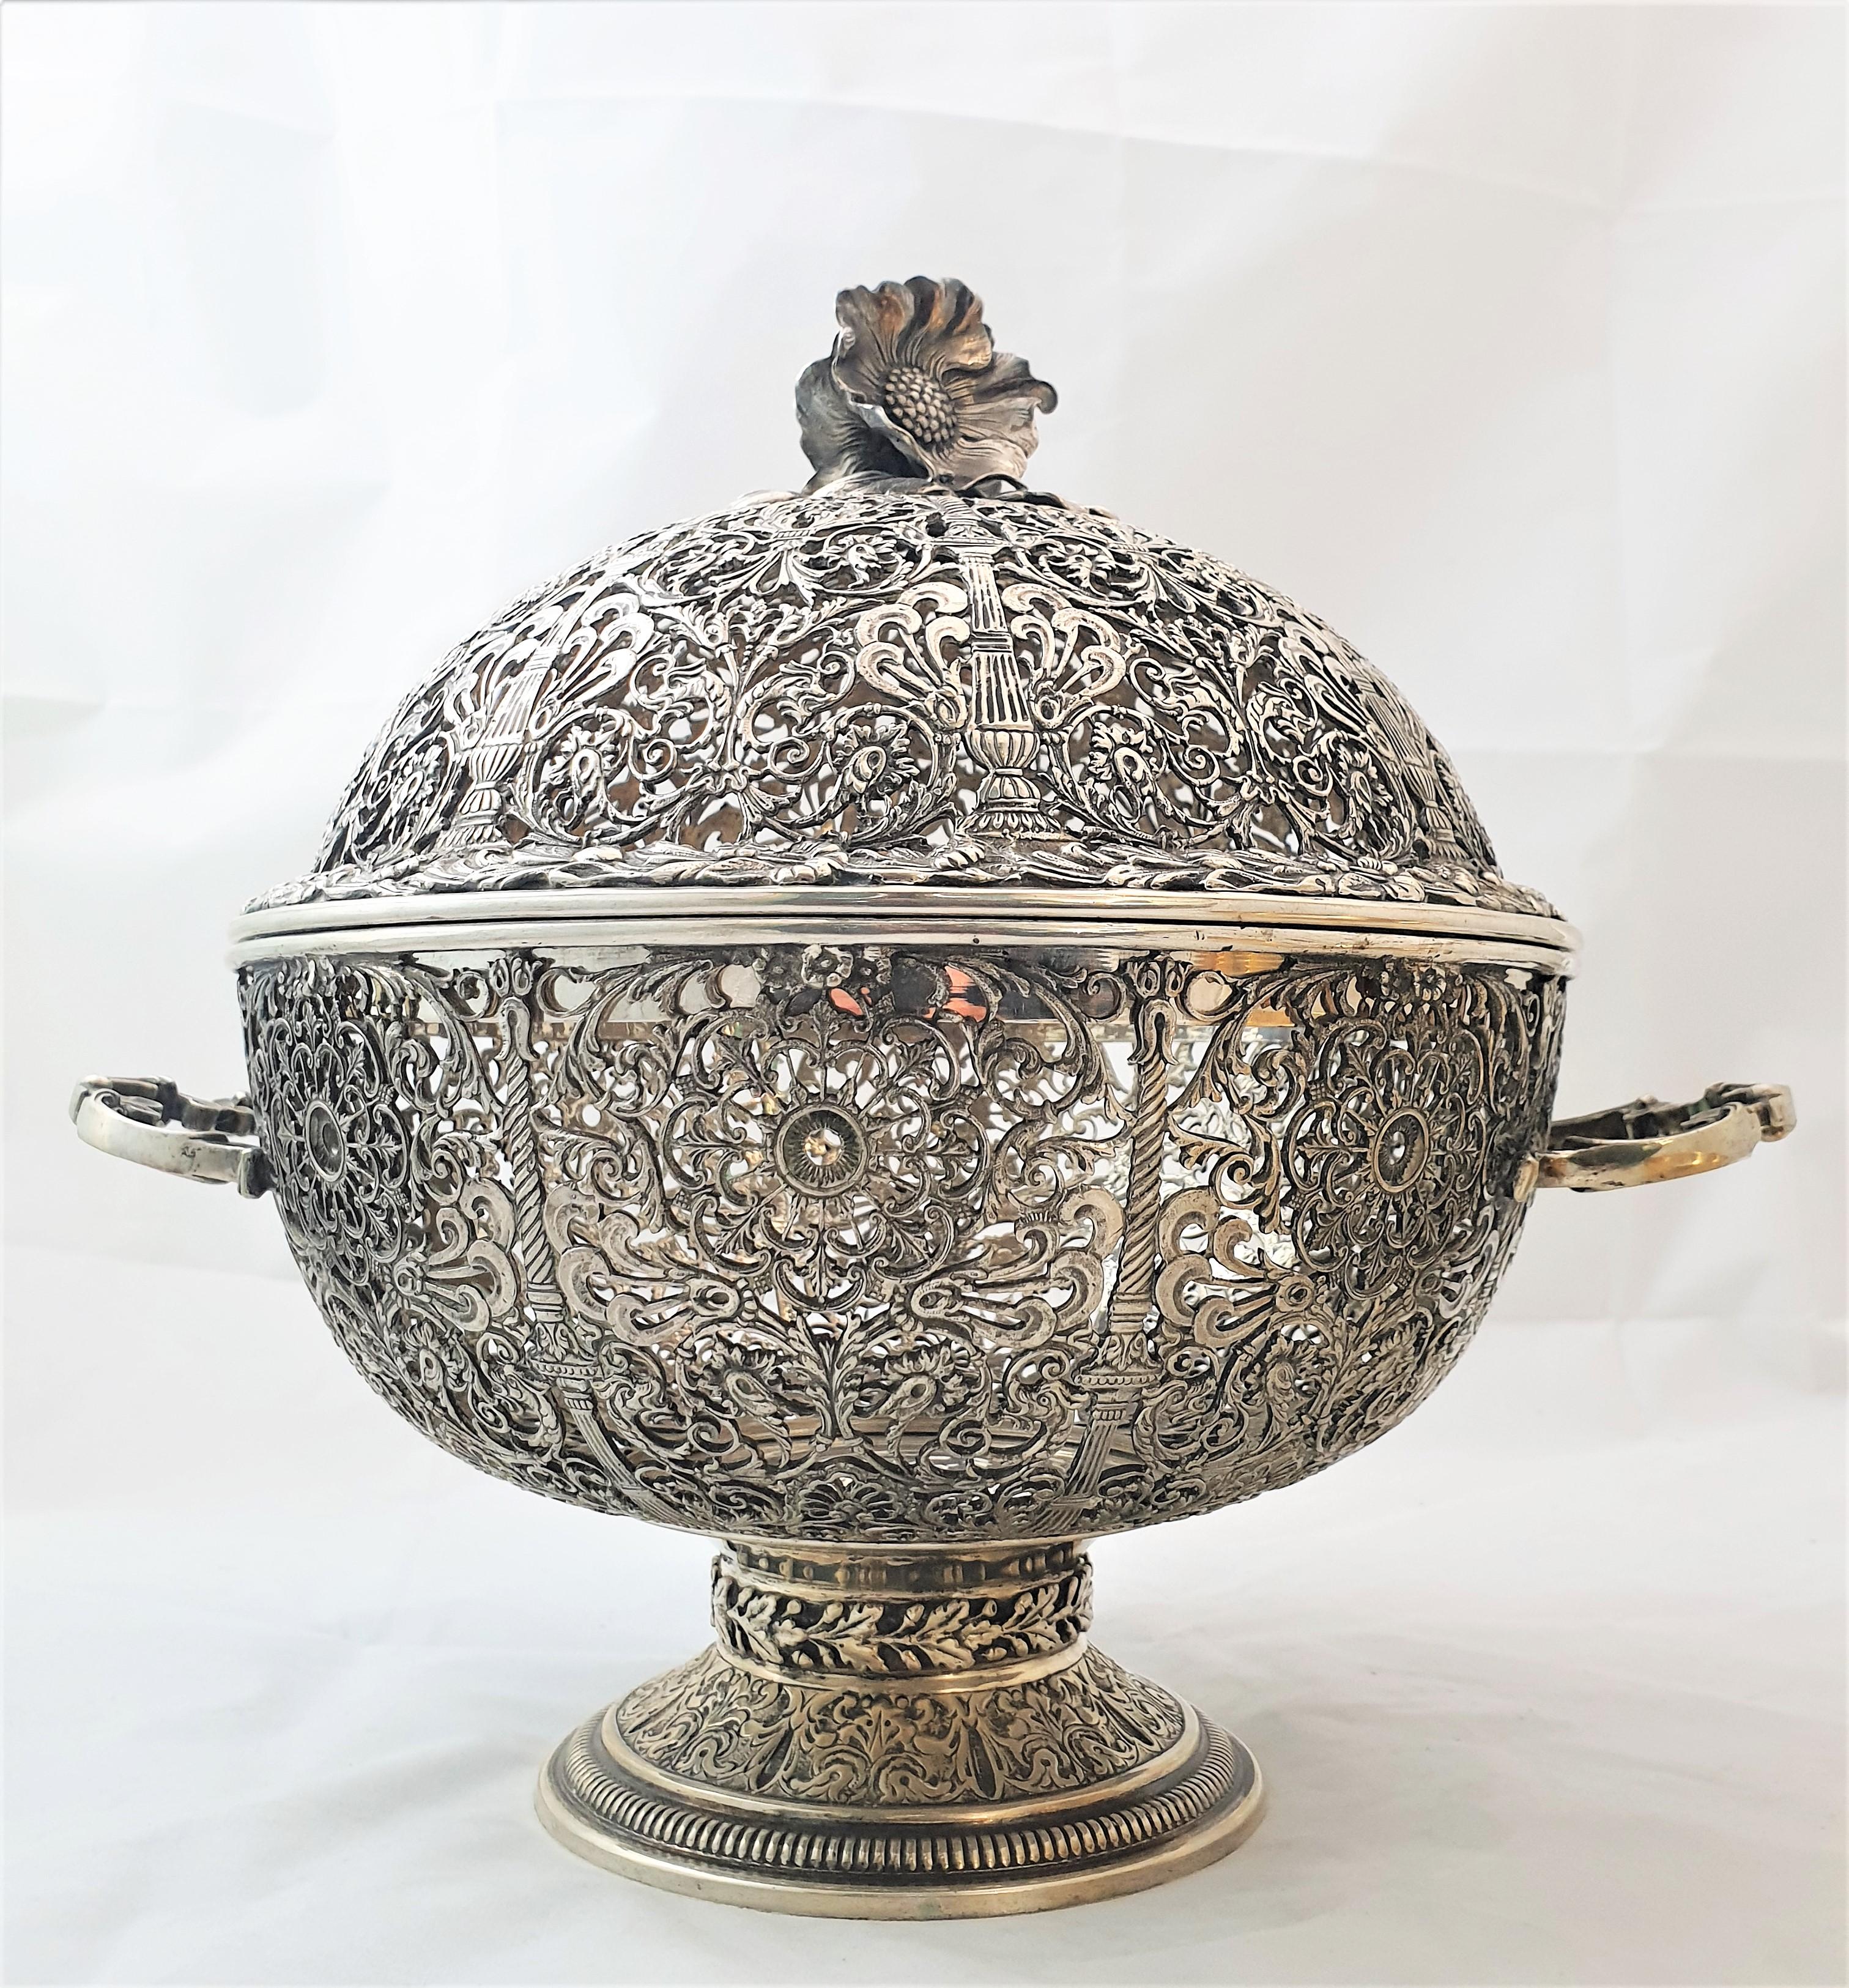 20th Century Italian Silver Fretwork Basket with Cover by Messulam Milan Italy For Sale 2